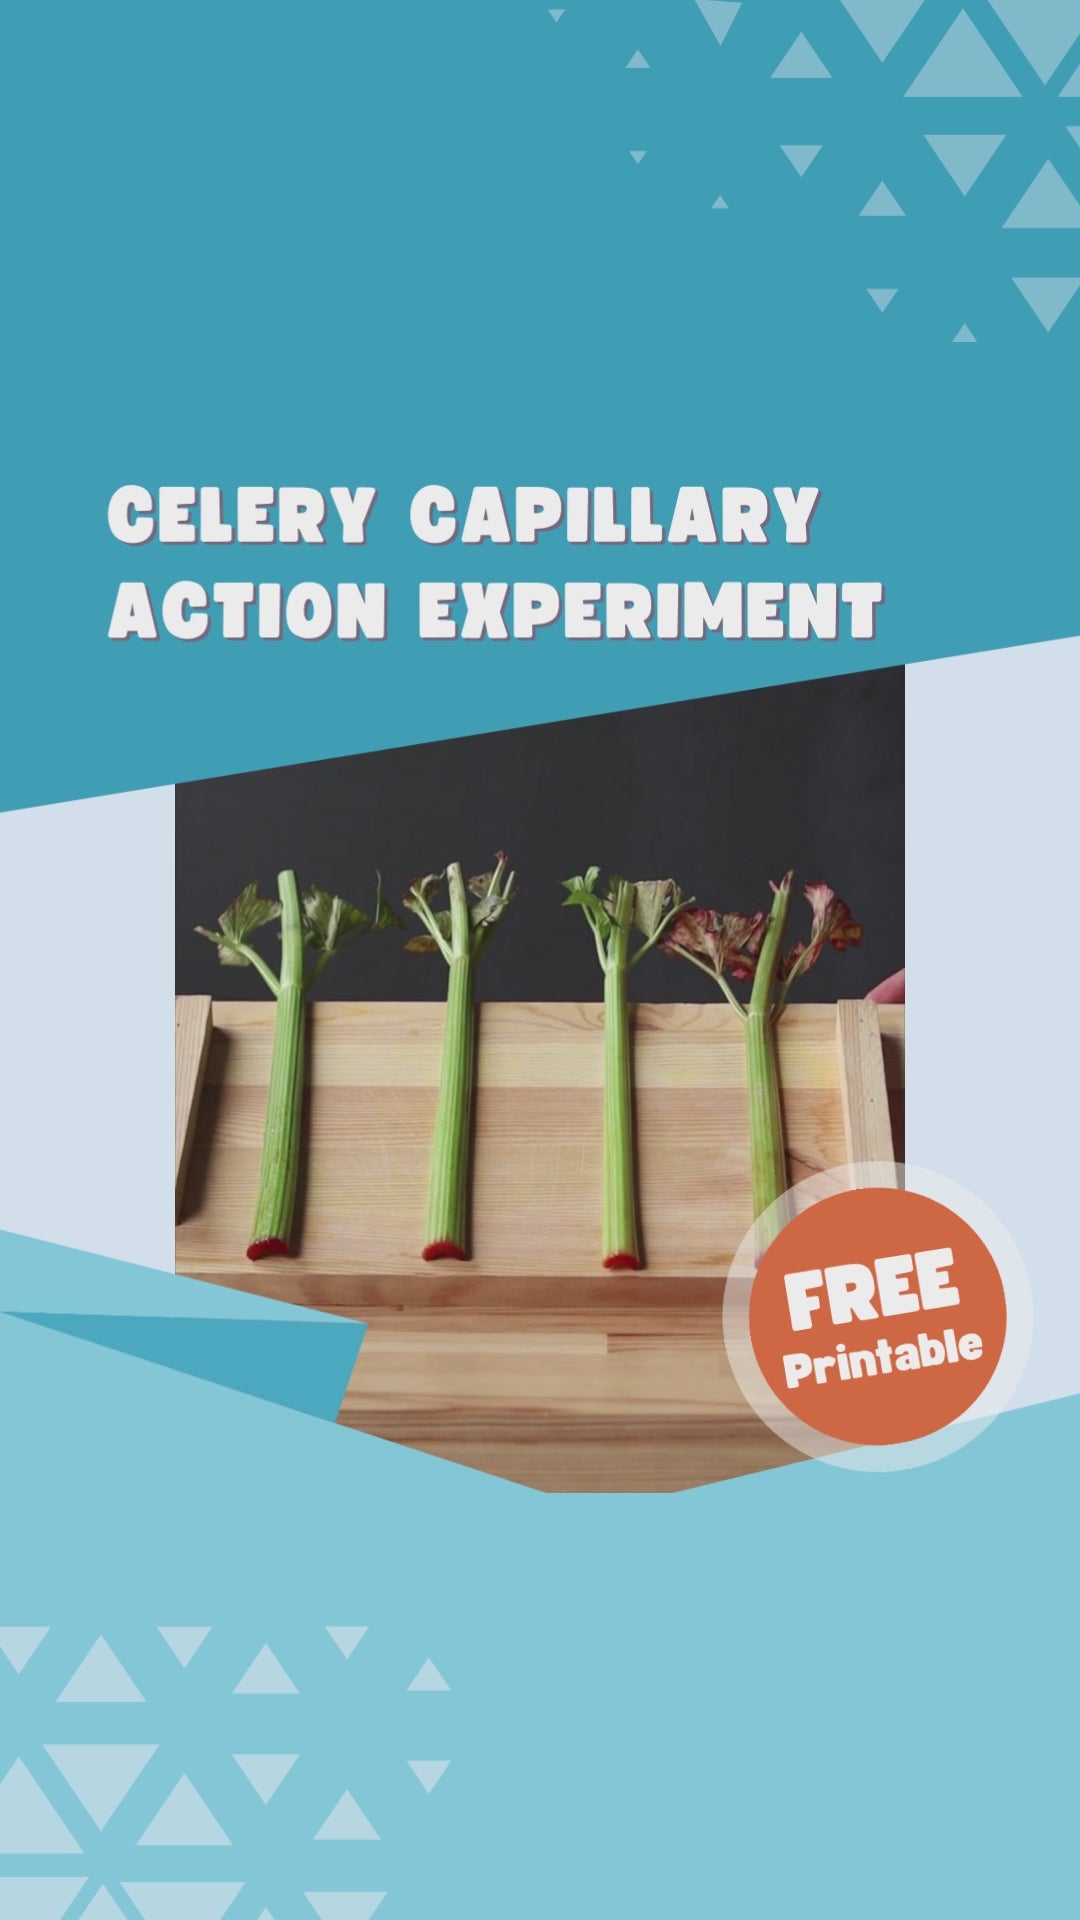 Load video: Unlock the wonders of science with our Celery Capillary Action Experiment! 🌱🔬 Dive into the world of scientific exploration and nurture critical thinking, observational skills, and hands-on learning. 🧪✨ This FREE PDF guide is your gateway to understanding capillary action and its fascinating role in plants. 📚🌿 But wait, there&#39;s more! Check out our captivating video demonstration that brings the experiment to life. 🎥🌟 Let curiosity lead the way as you embark on this educational adventure! 🚀💡Materials:Four celery stalks with leavesFour clear glasses or jarsWaterRed food coloringA timerA dry trayGet hands-on with our free printable resources at our Steam Project Center: https://brainsteamedu.com/pages/steam-project-center  Let the learning and fun begin! 🚀🌈 #CeleryCapillaryExperiment #STEMeducation #HandsOnLearning #CuriosityUnleashed #ScienceExperiment #EducationalResources #FreePDF #FreePrintables #CuriousExplorers #ScientificAdventure #CaptivatingExperiment #InteractiveLearning #EducationalExperience #MindBogglingOobleck #PeculiarProperties #UnravelDiscoveries #EngagingActivities #ActiveLearning #NurtureInquiry #ThrillingJourney #YoungScientists #FreePDFGuide #SteamProjectCenter